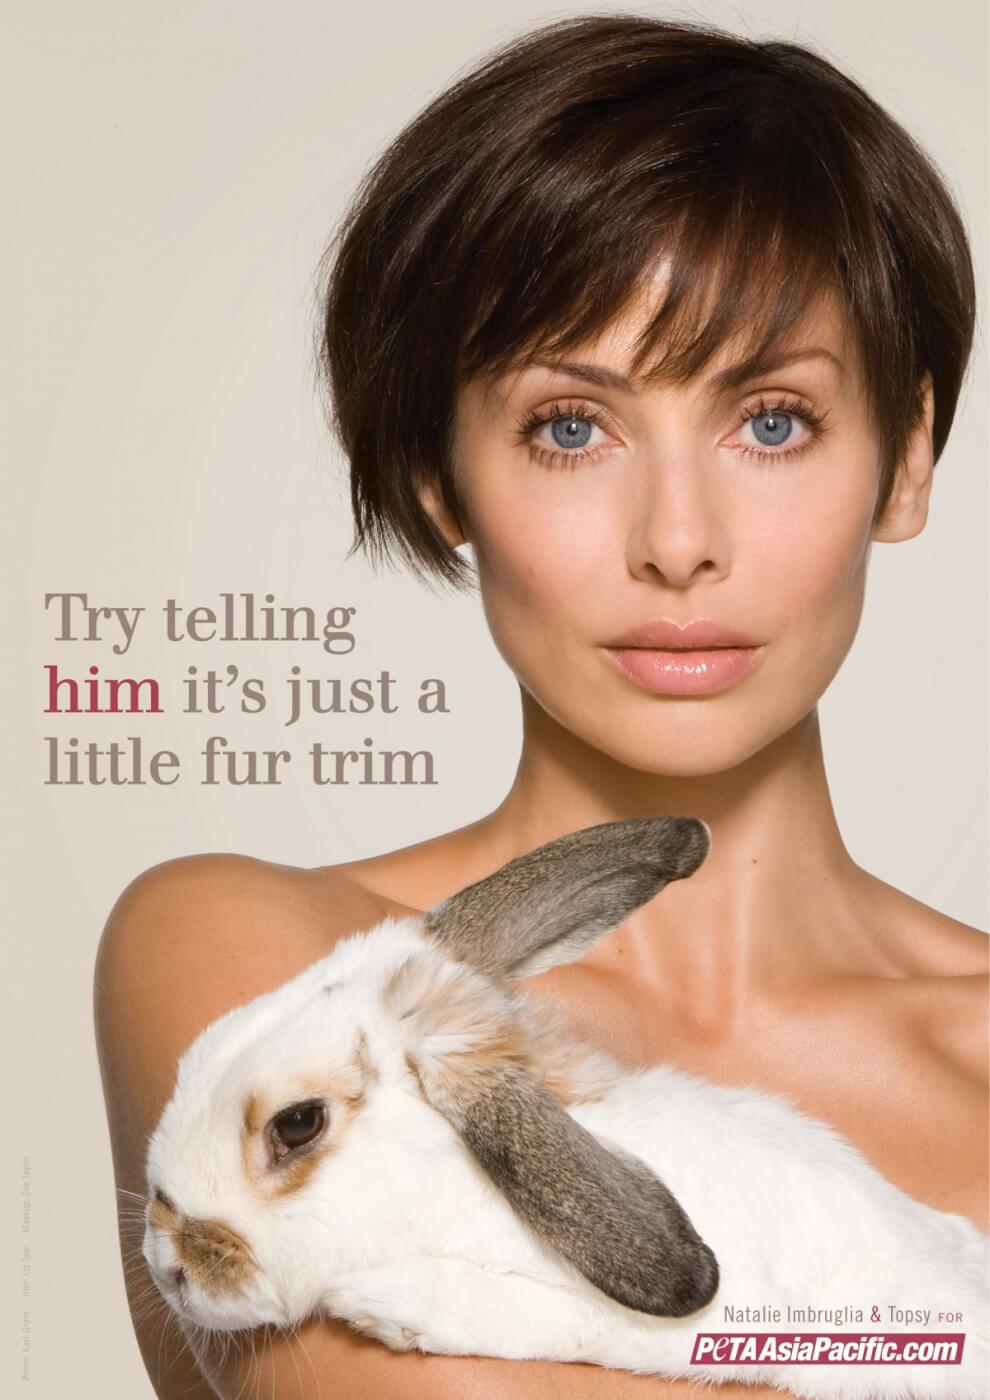 Natalie Imbruglia poses with a rabbit. Text reads: Try telling him its just a little fur trim.